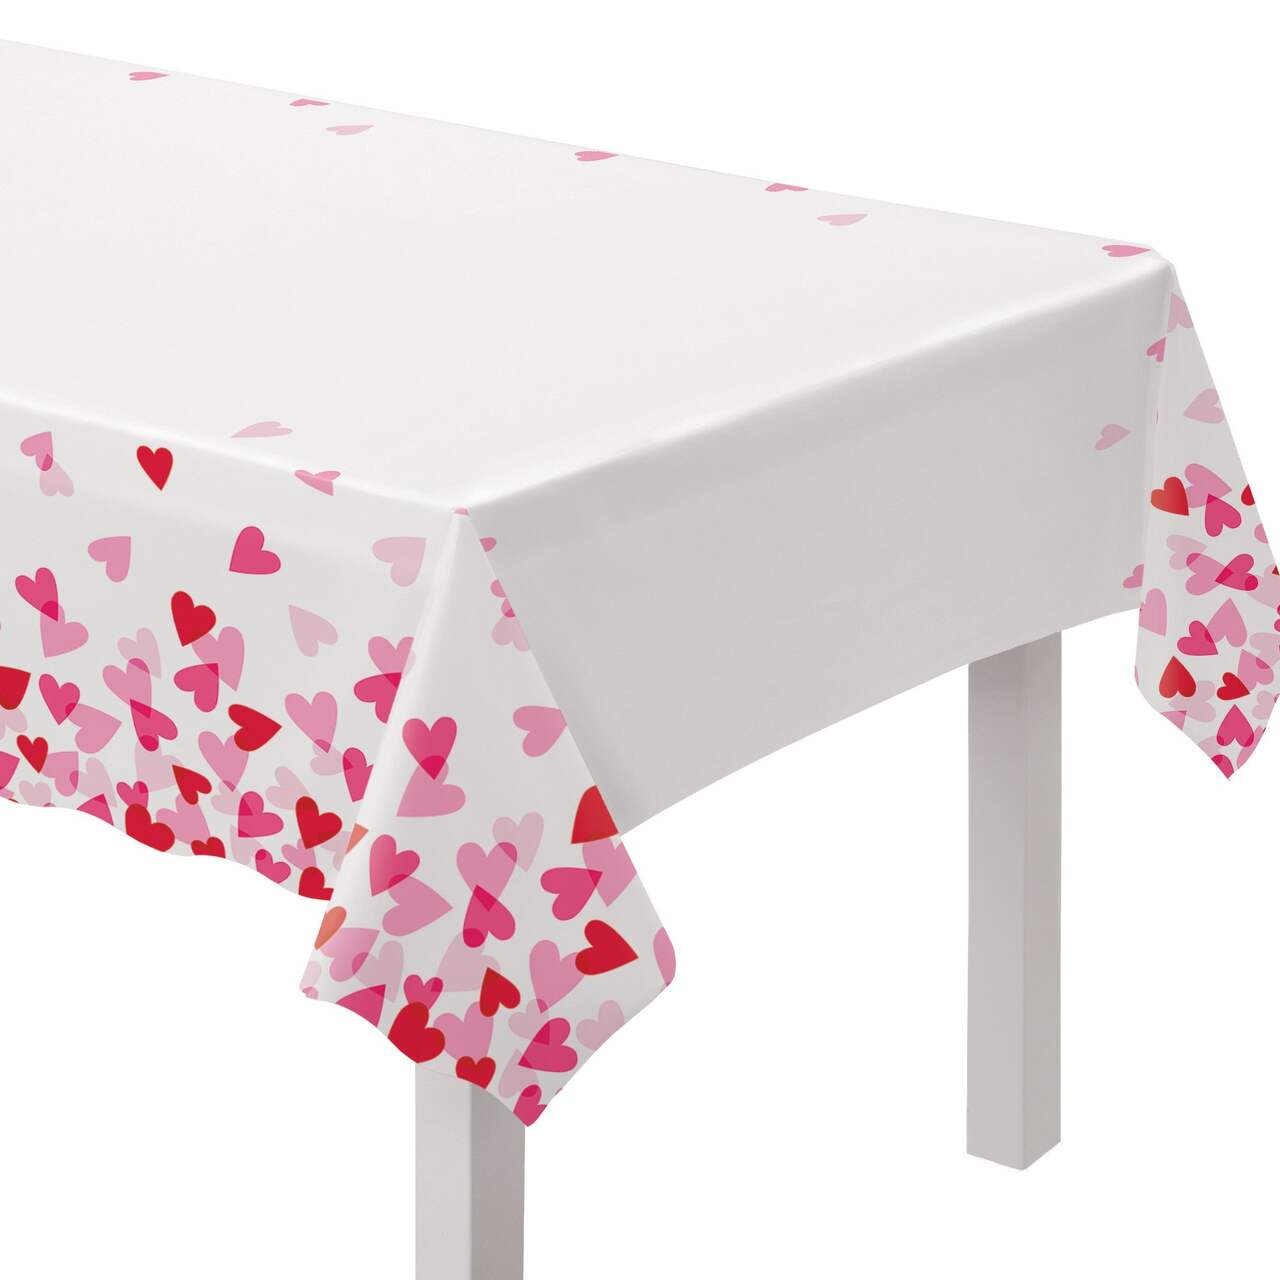 https://media-www.canadiantire.ca/product/seasonal-gardening/party-city-seasonal/party-city-micro-season-decor/8541409/valentines-heart-party-tablecover-46189717-dcd3-4b15-9a6d-a74f8ca2de8e-jpgrendition.jpg?imdensity=1&imwidth=640&impolicy=mZoom